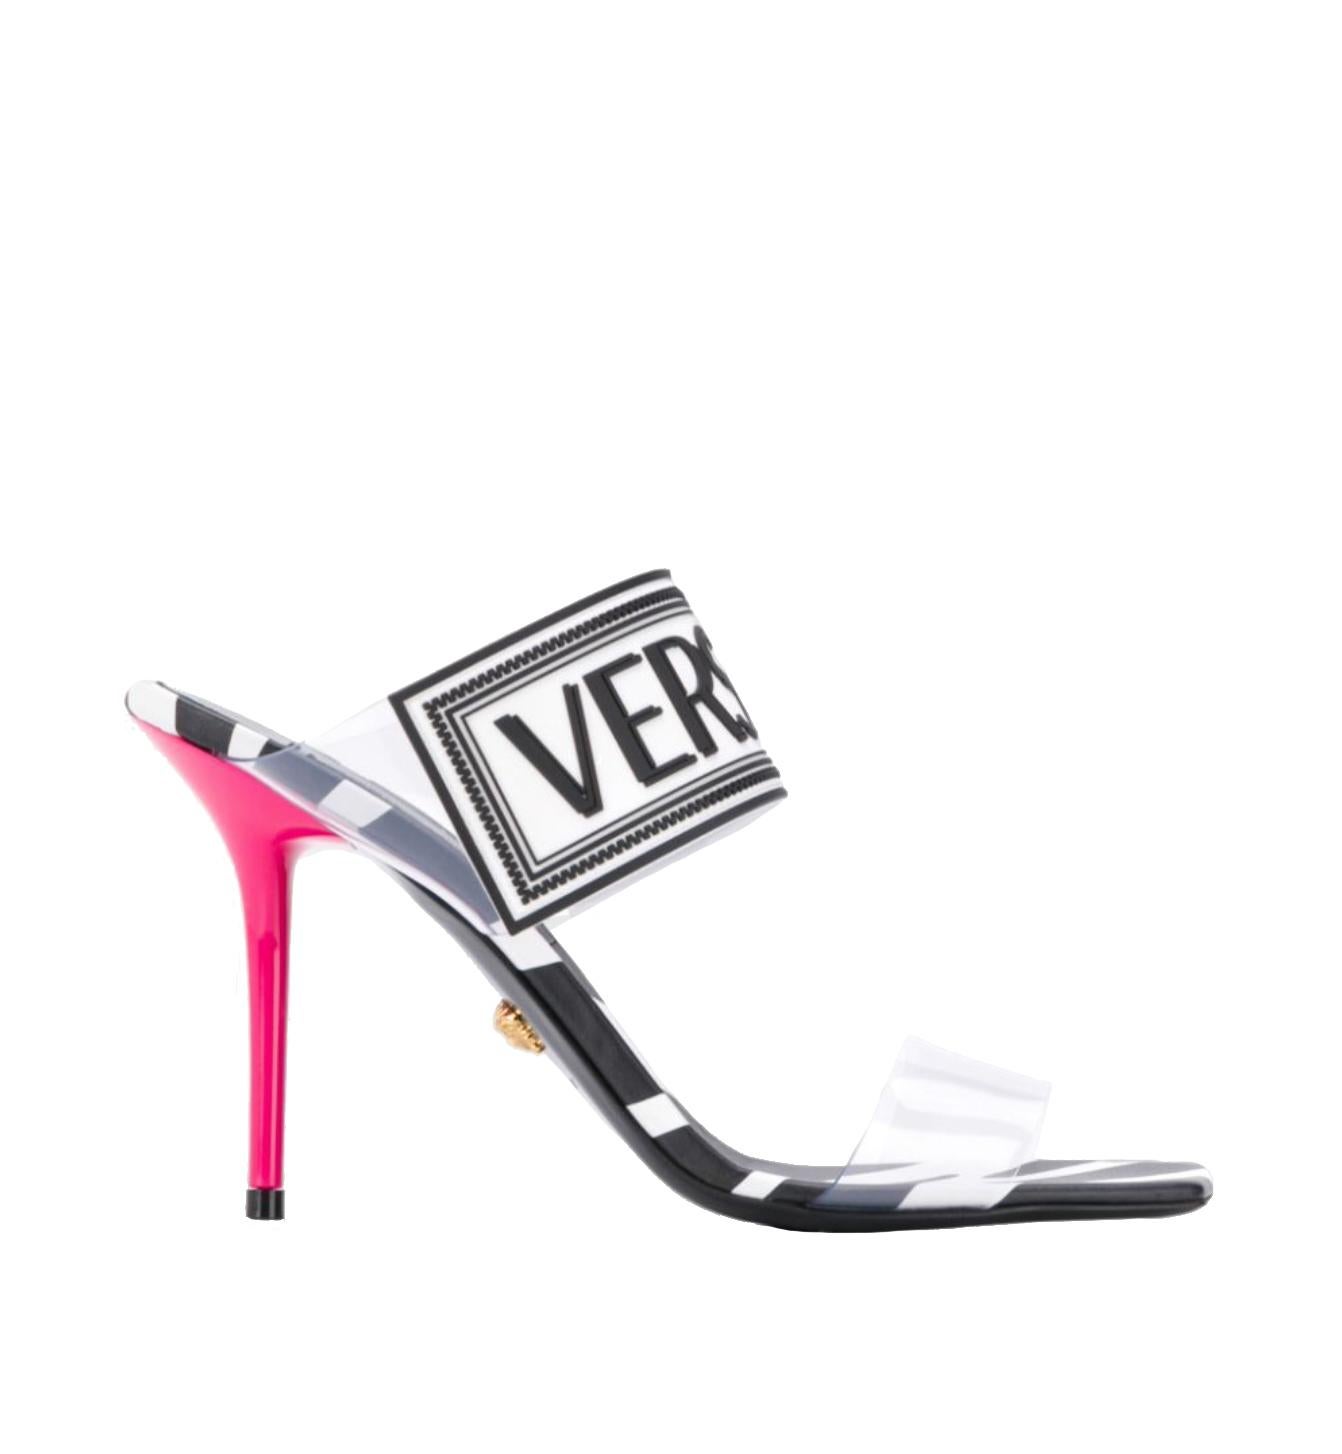 These Versace mules feature the 90s vintage logo, PVC straps, zebra print leather, a square toe, and a 95mm fuchsia stiletto heel. These are a great option to add some color and fun to your outfit. Brand new however this pair was tried on by a